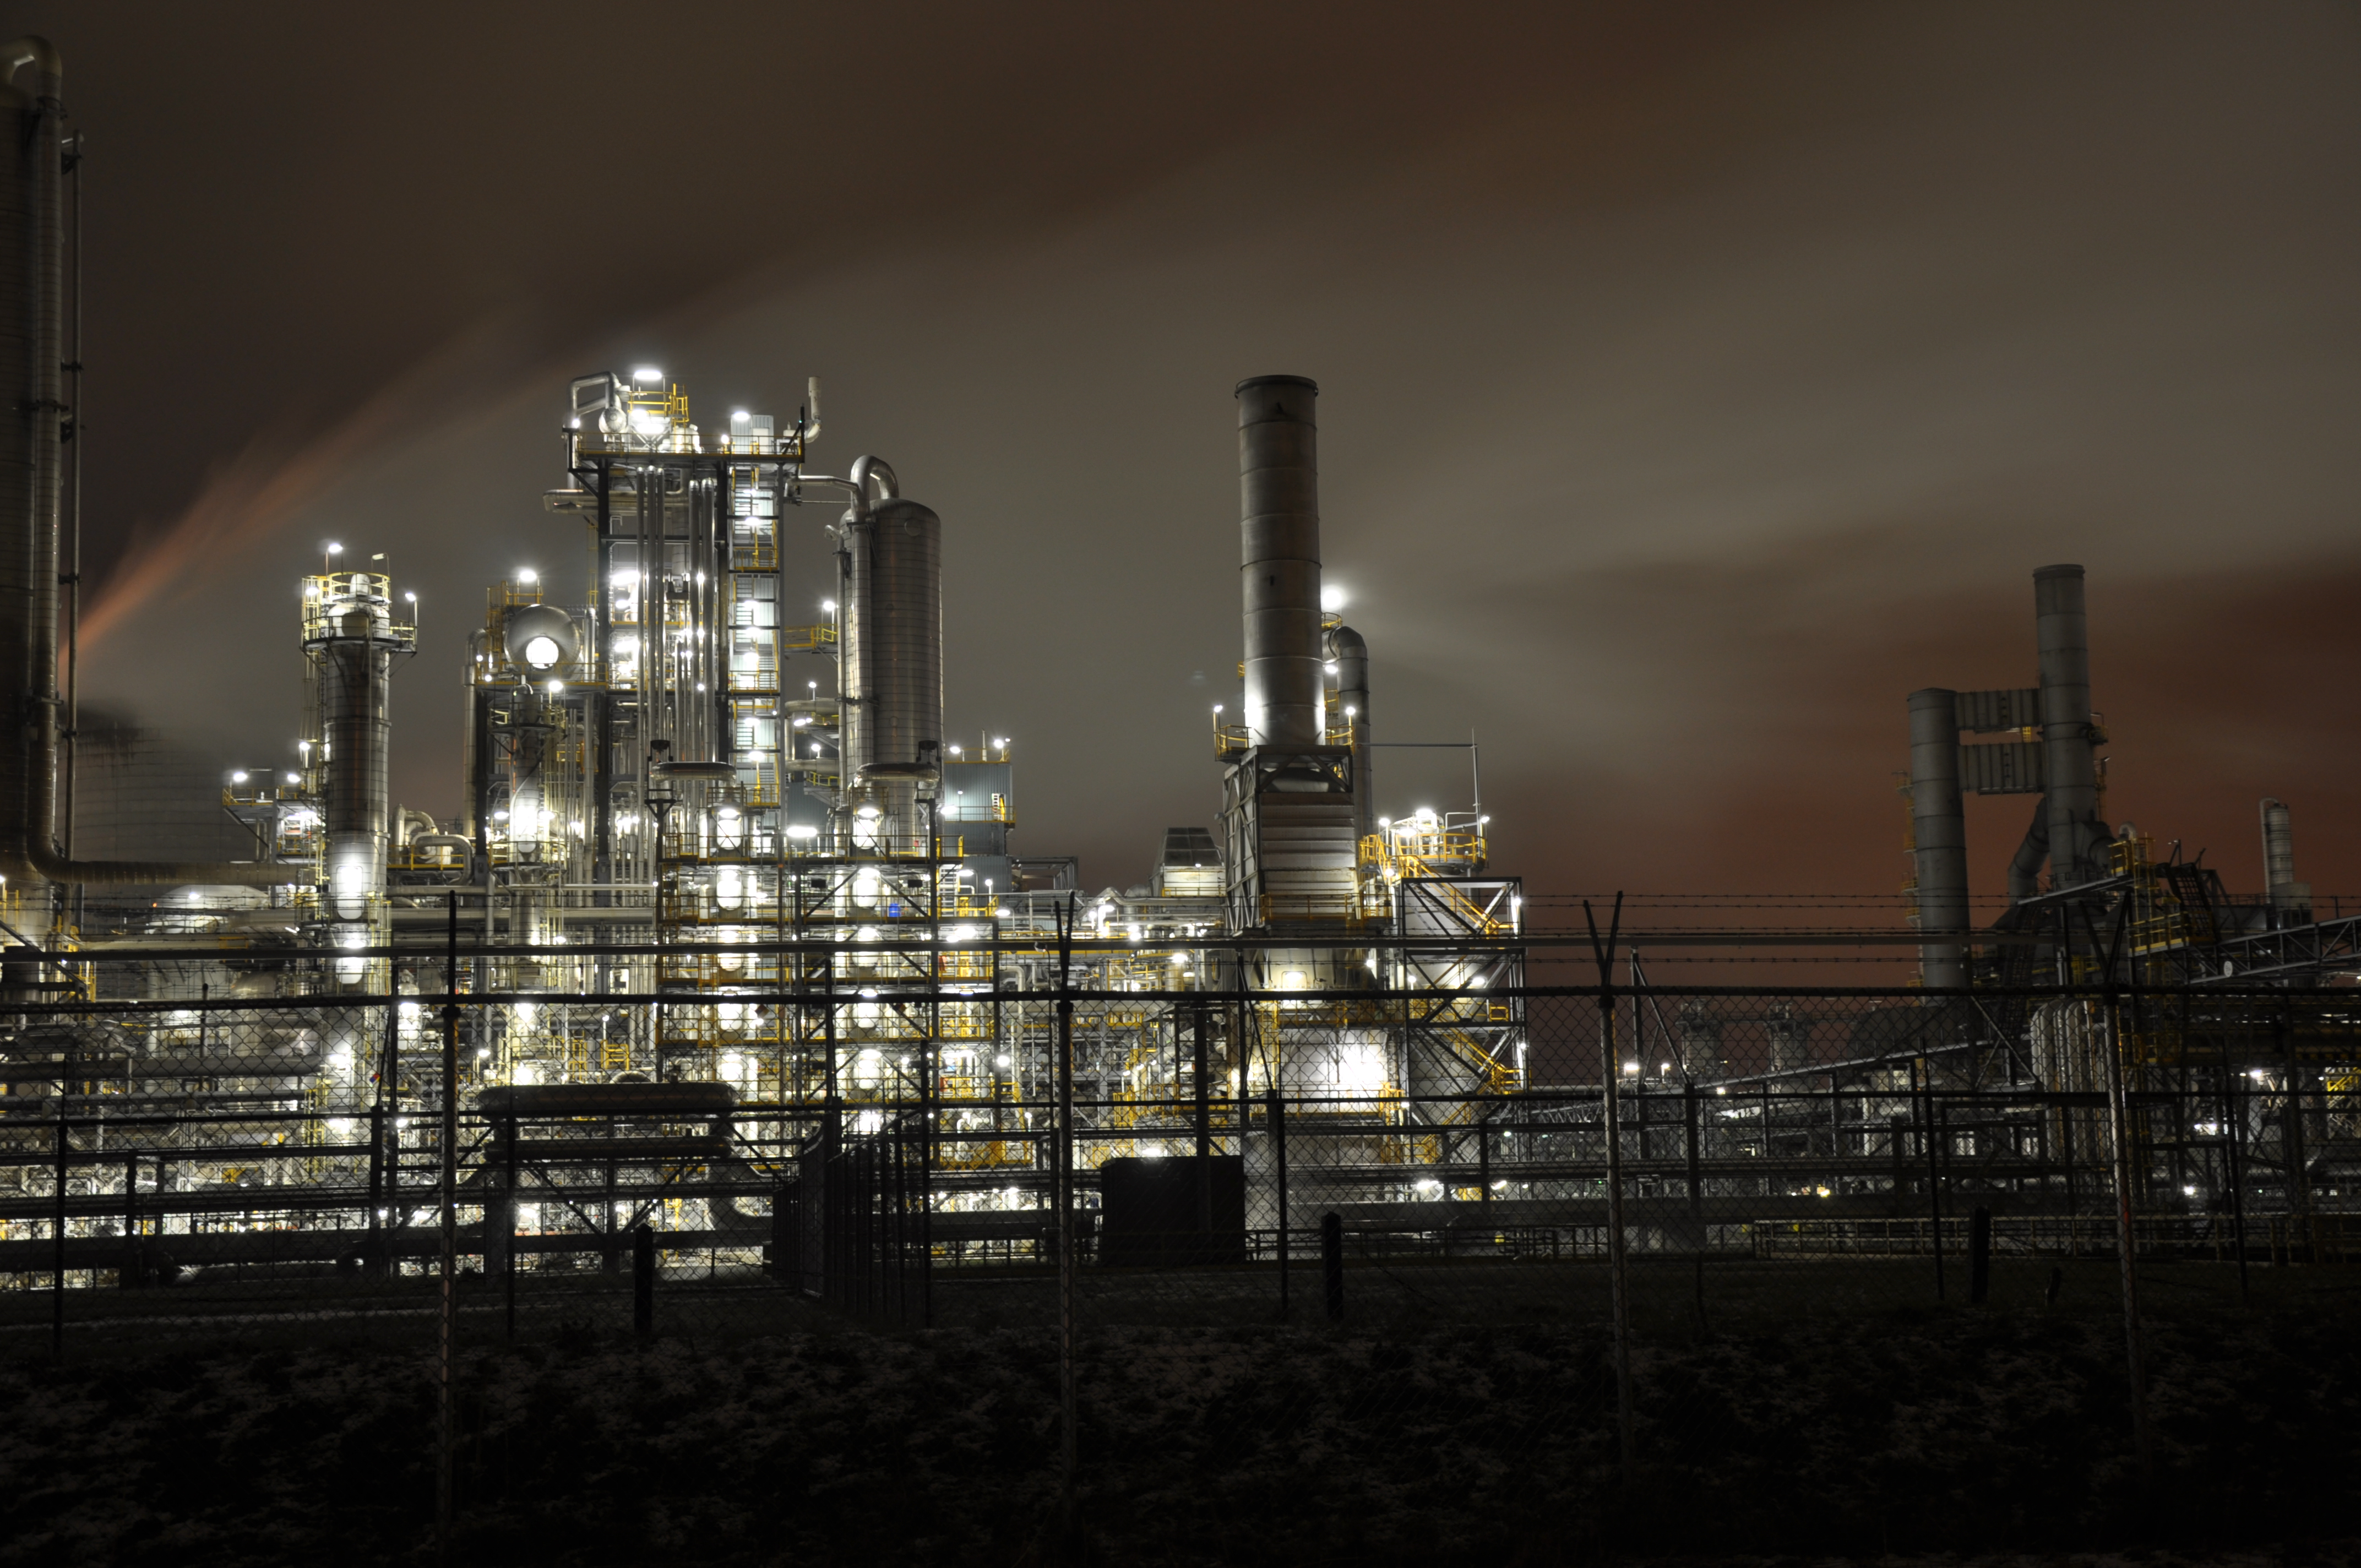 Industry at night photo